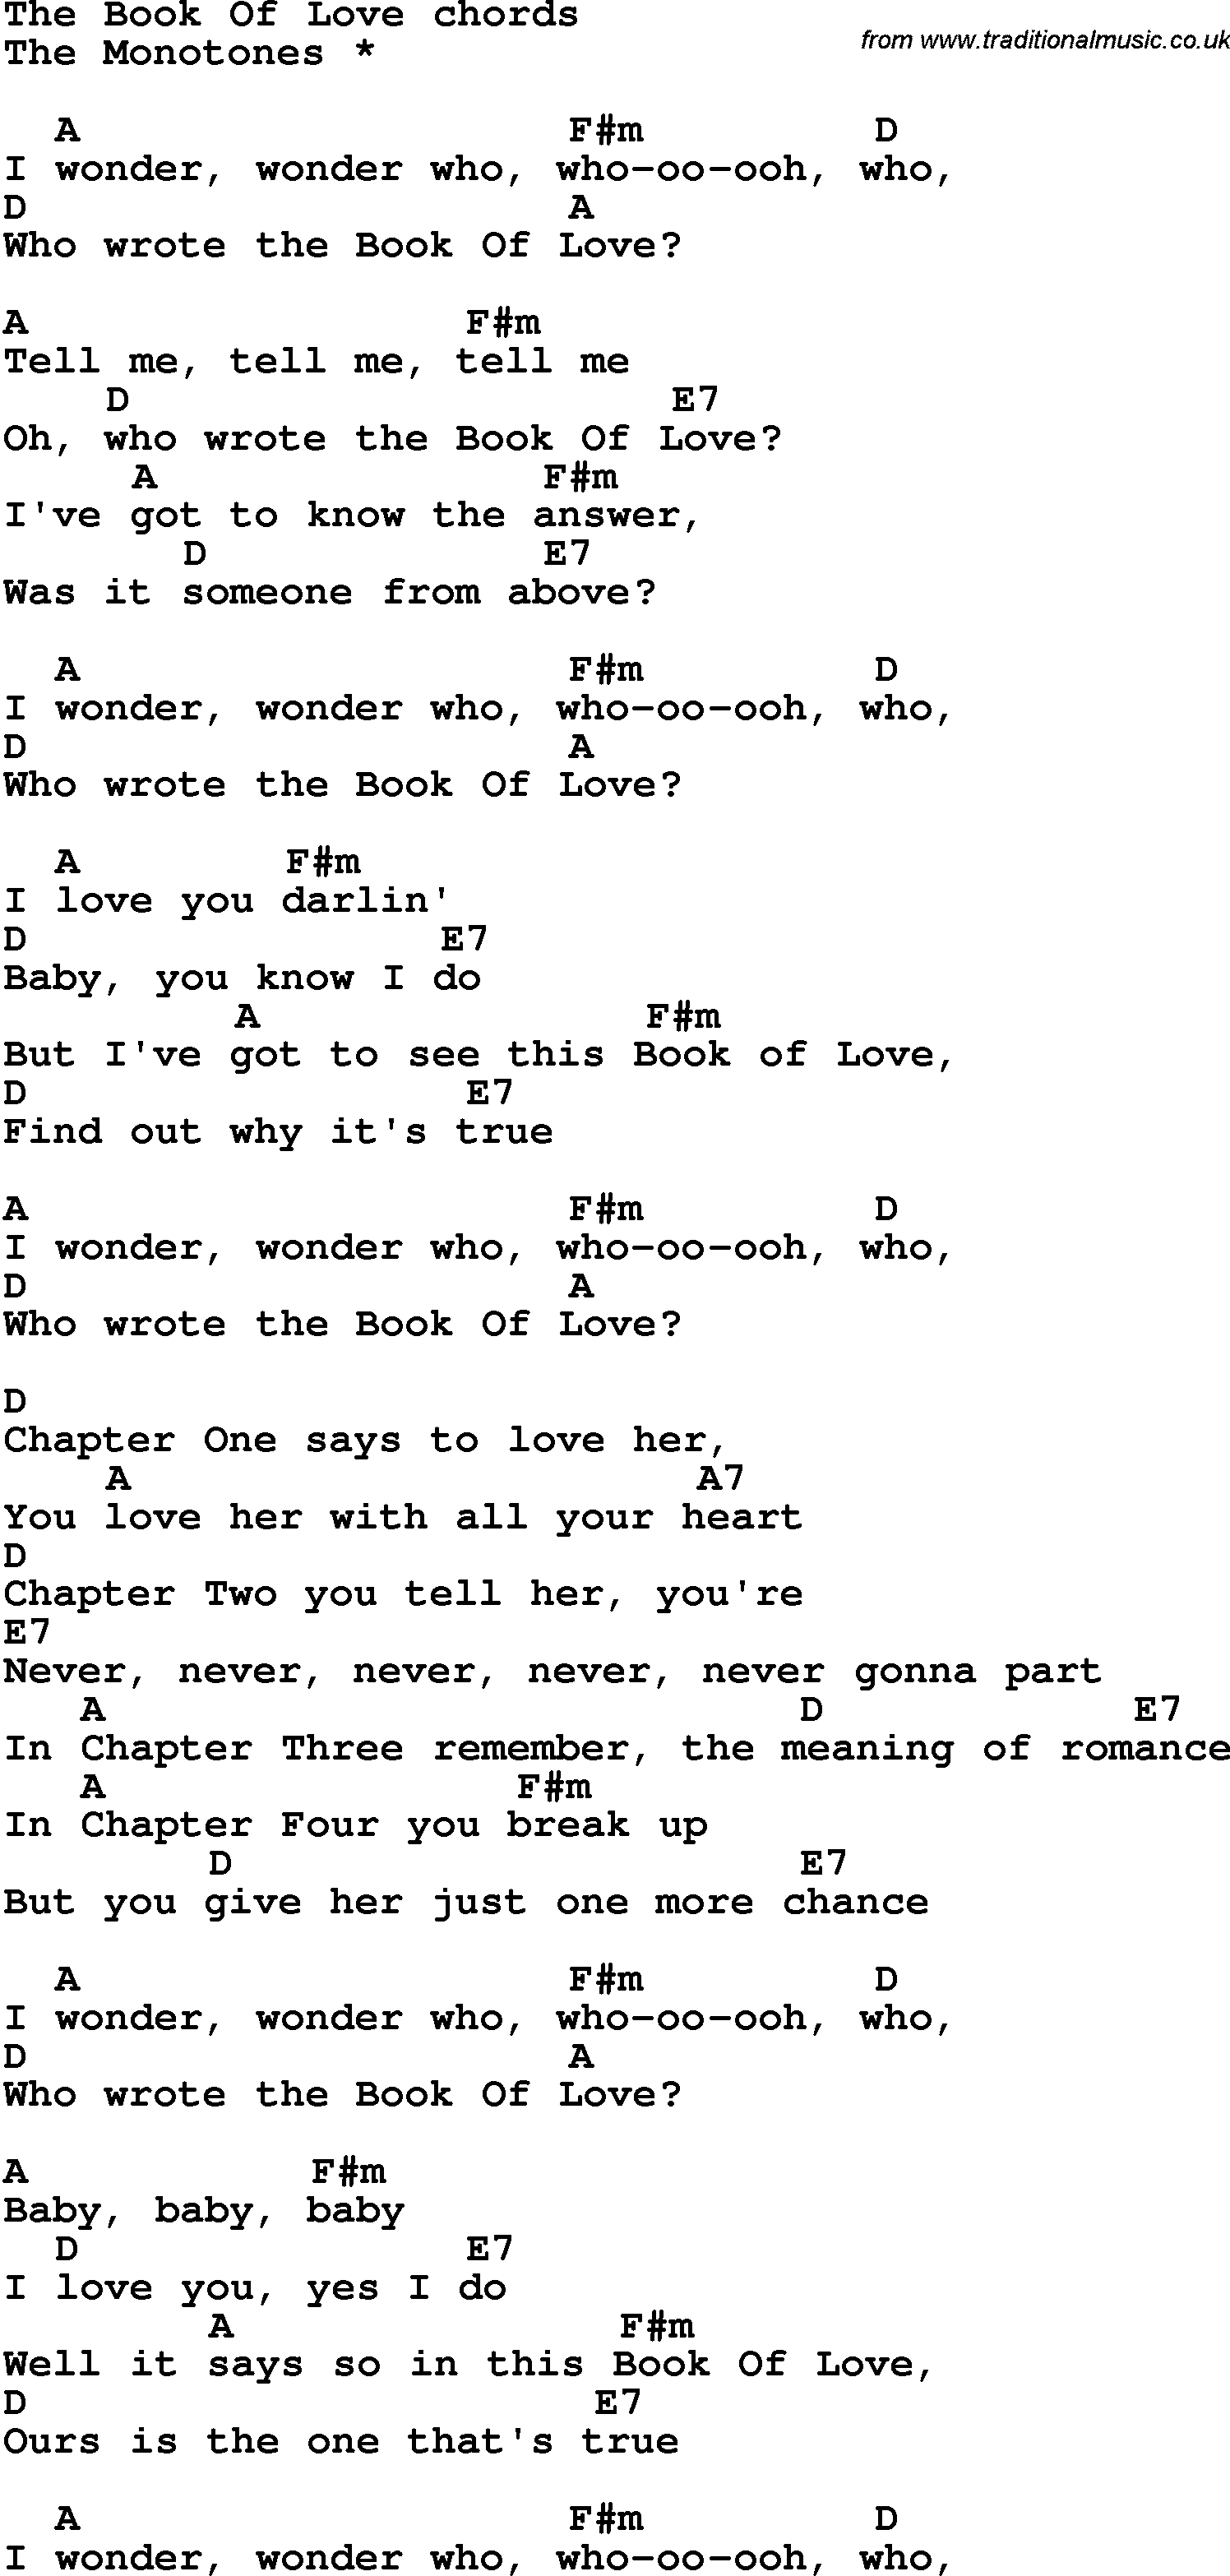 Song Lyrics with guitar chords for The Book Of Love - The Monotones